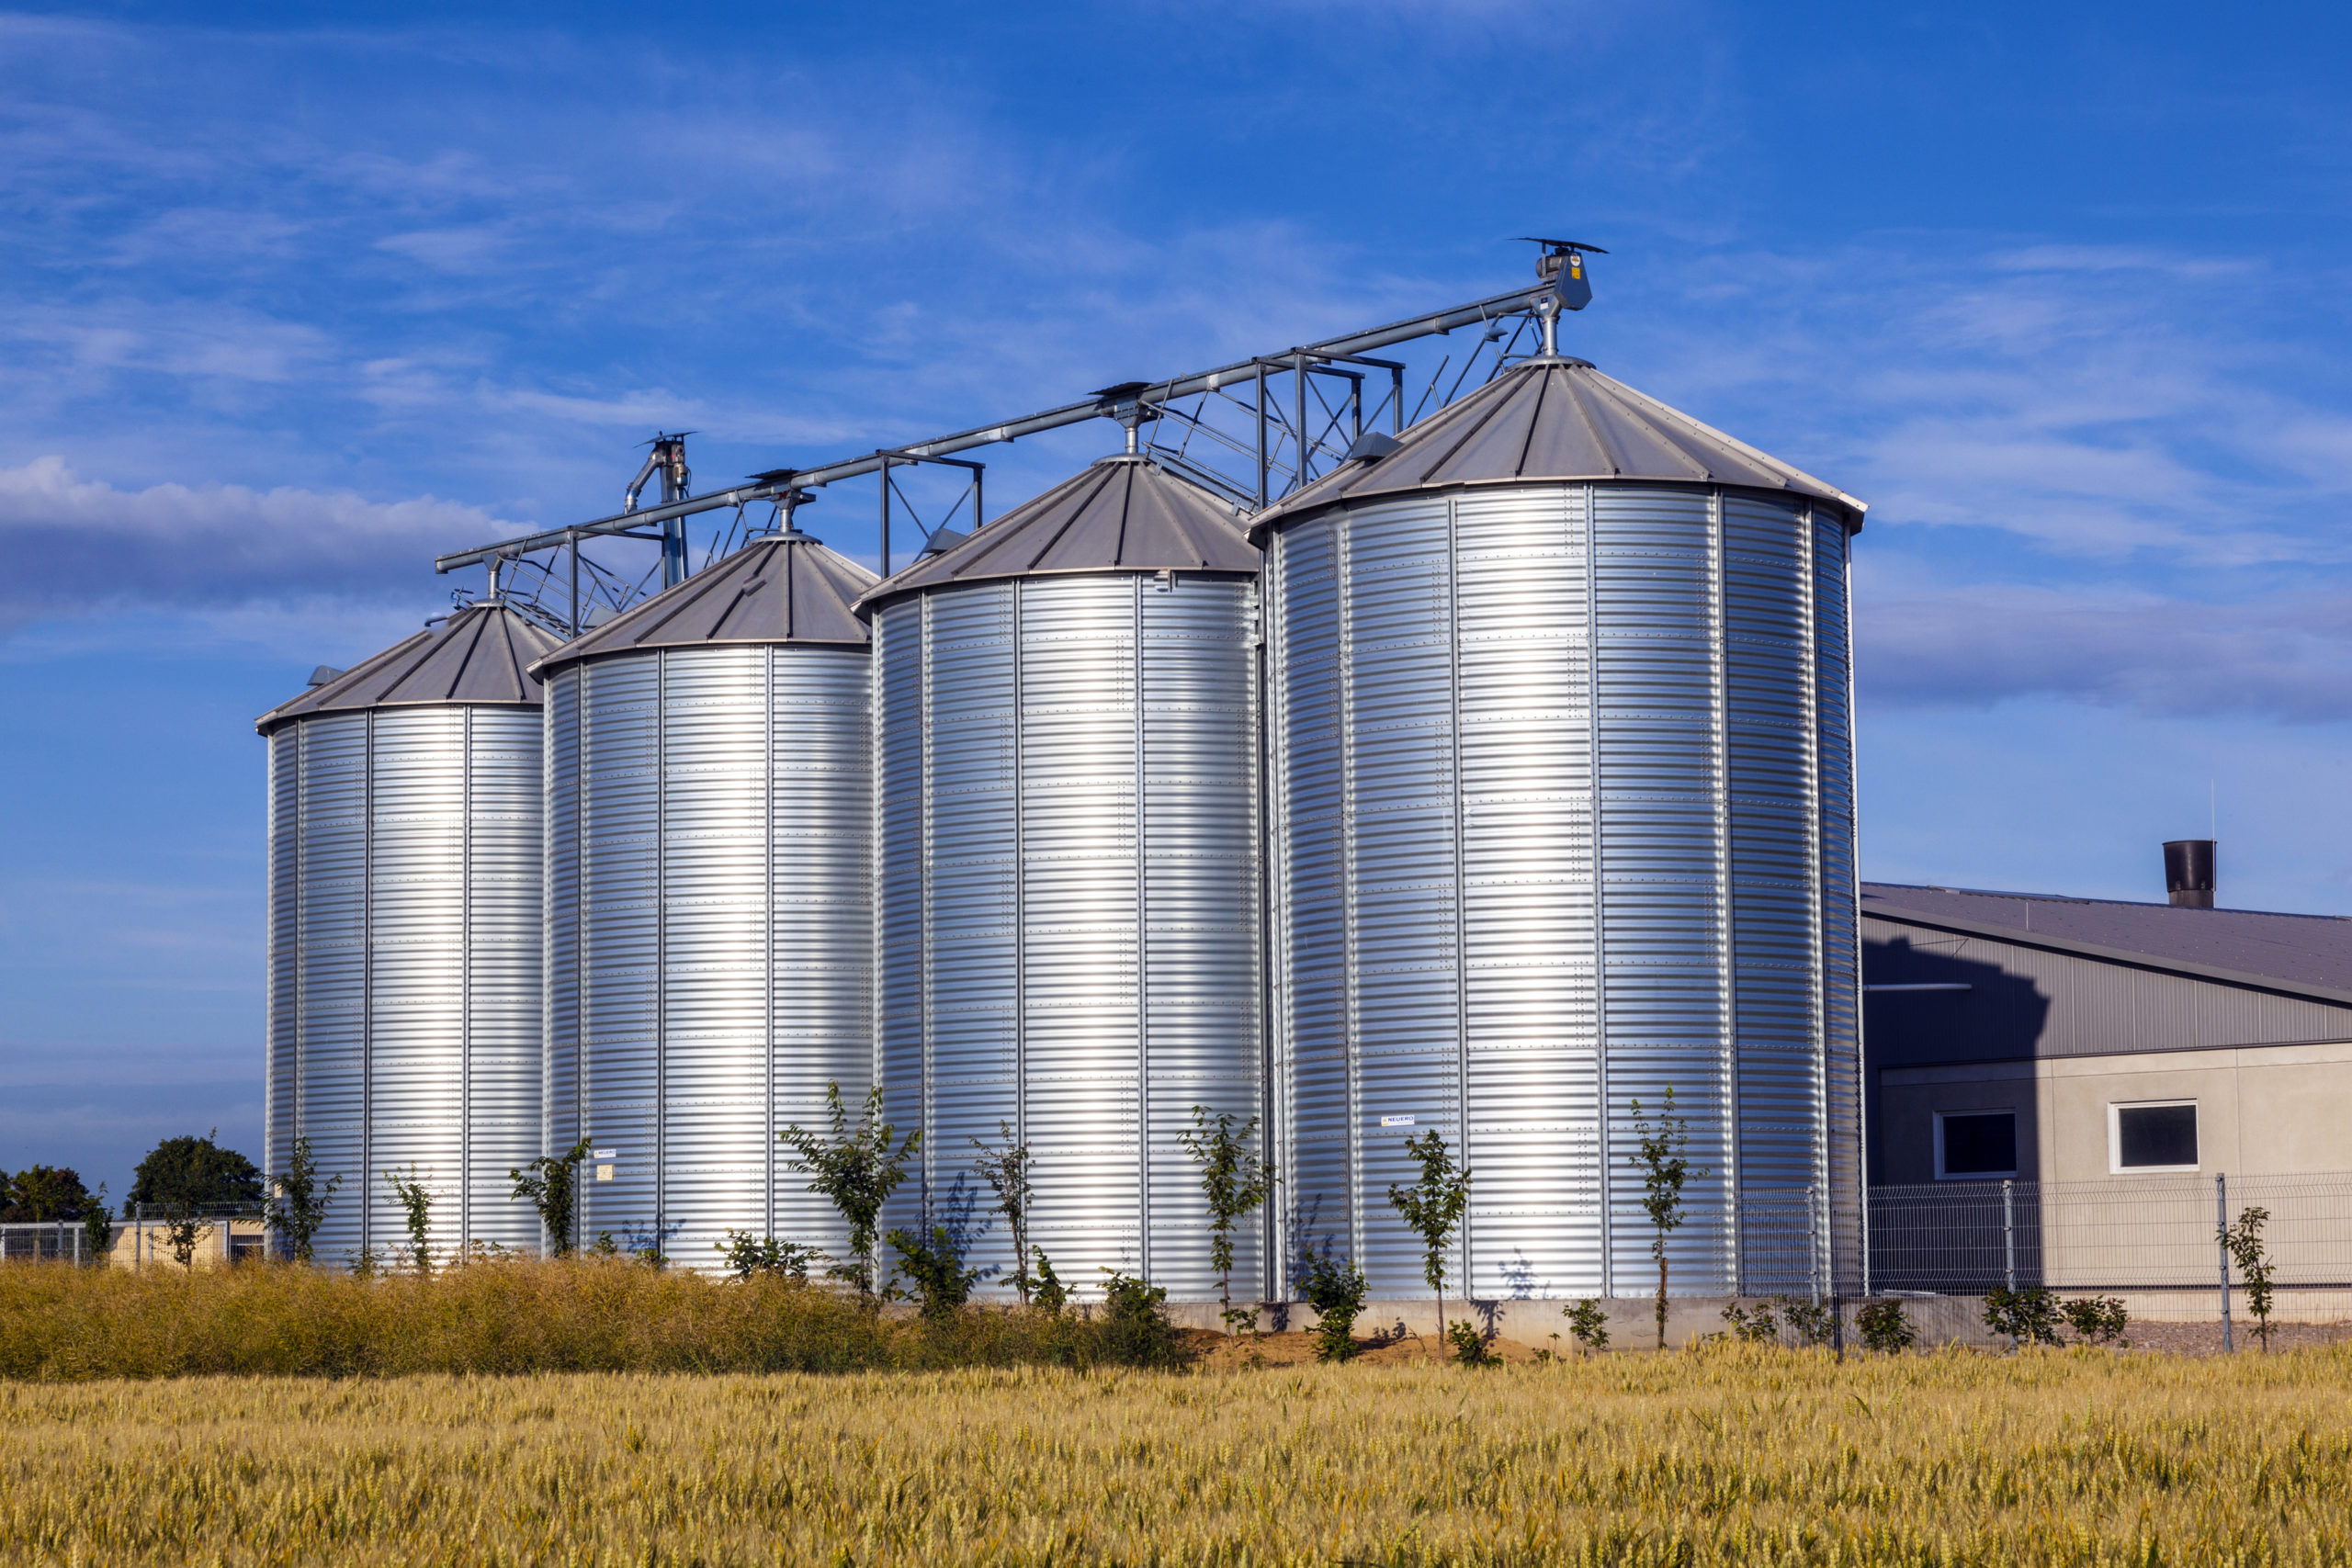 image of four grain bins on a farm in front of blue skies and green and brown grass